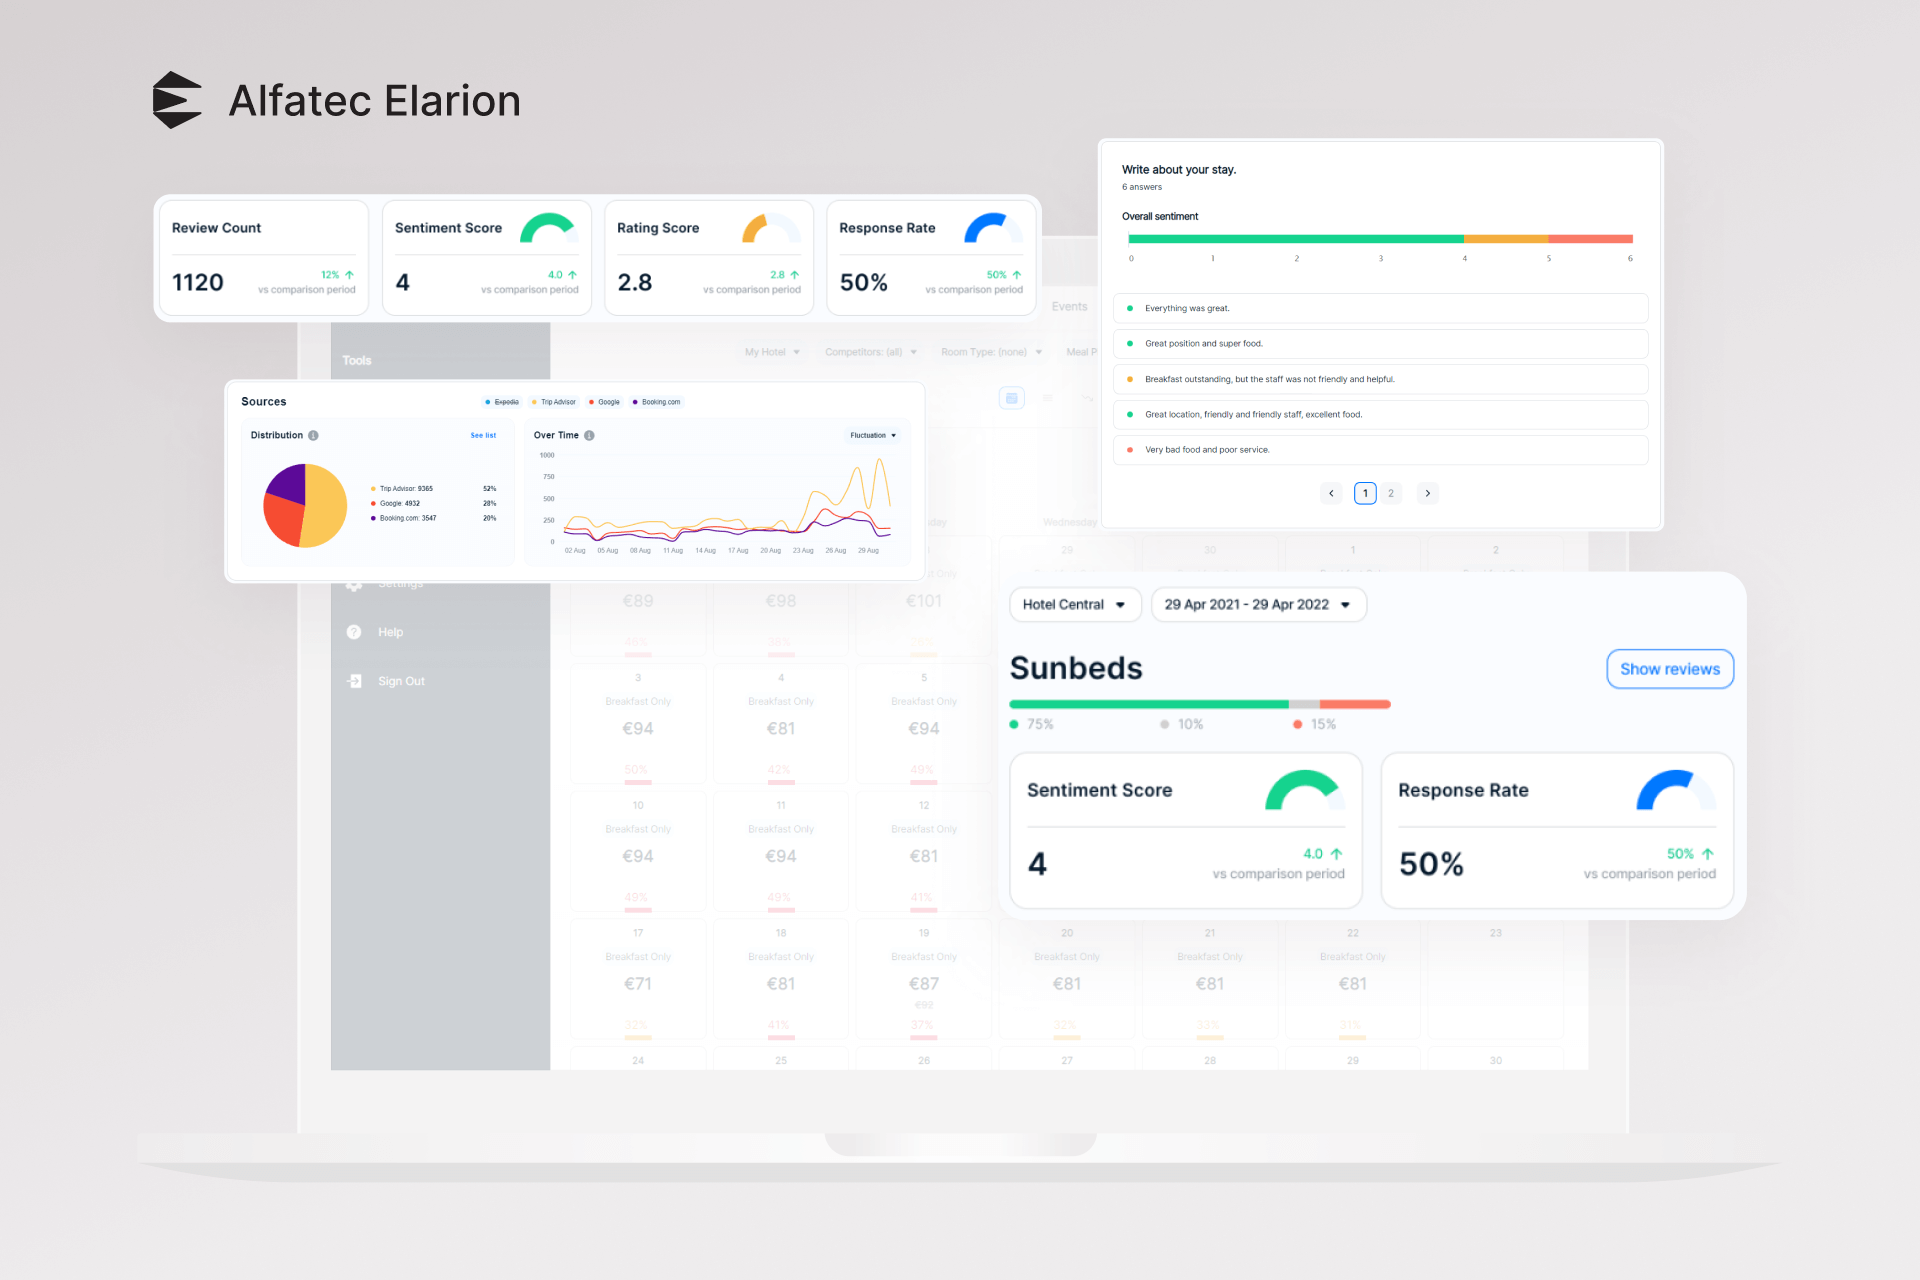 Customize the dashboard according to your needs